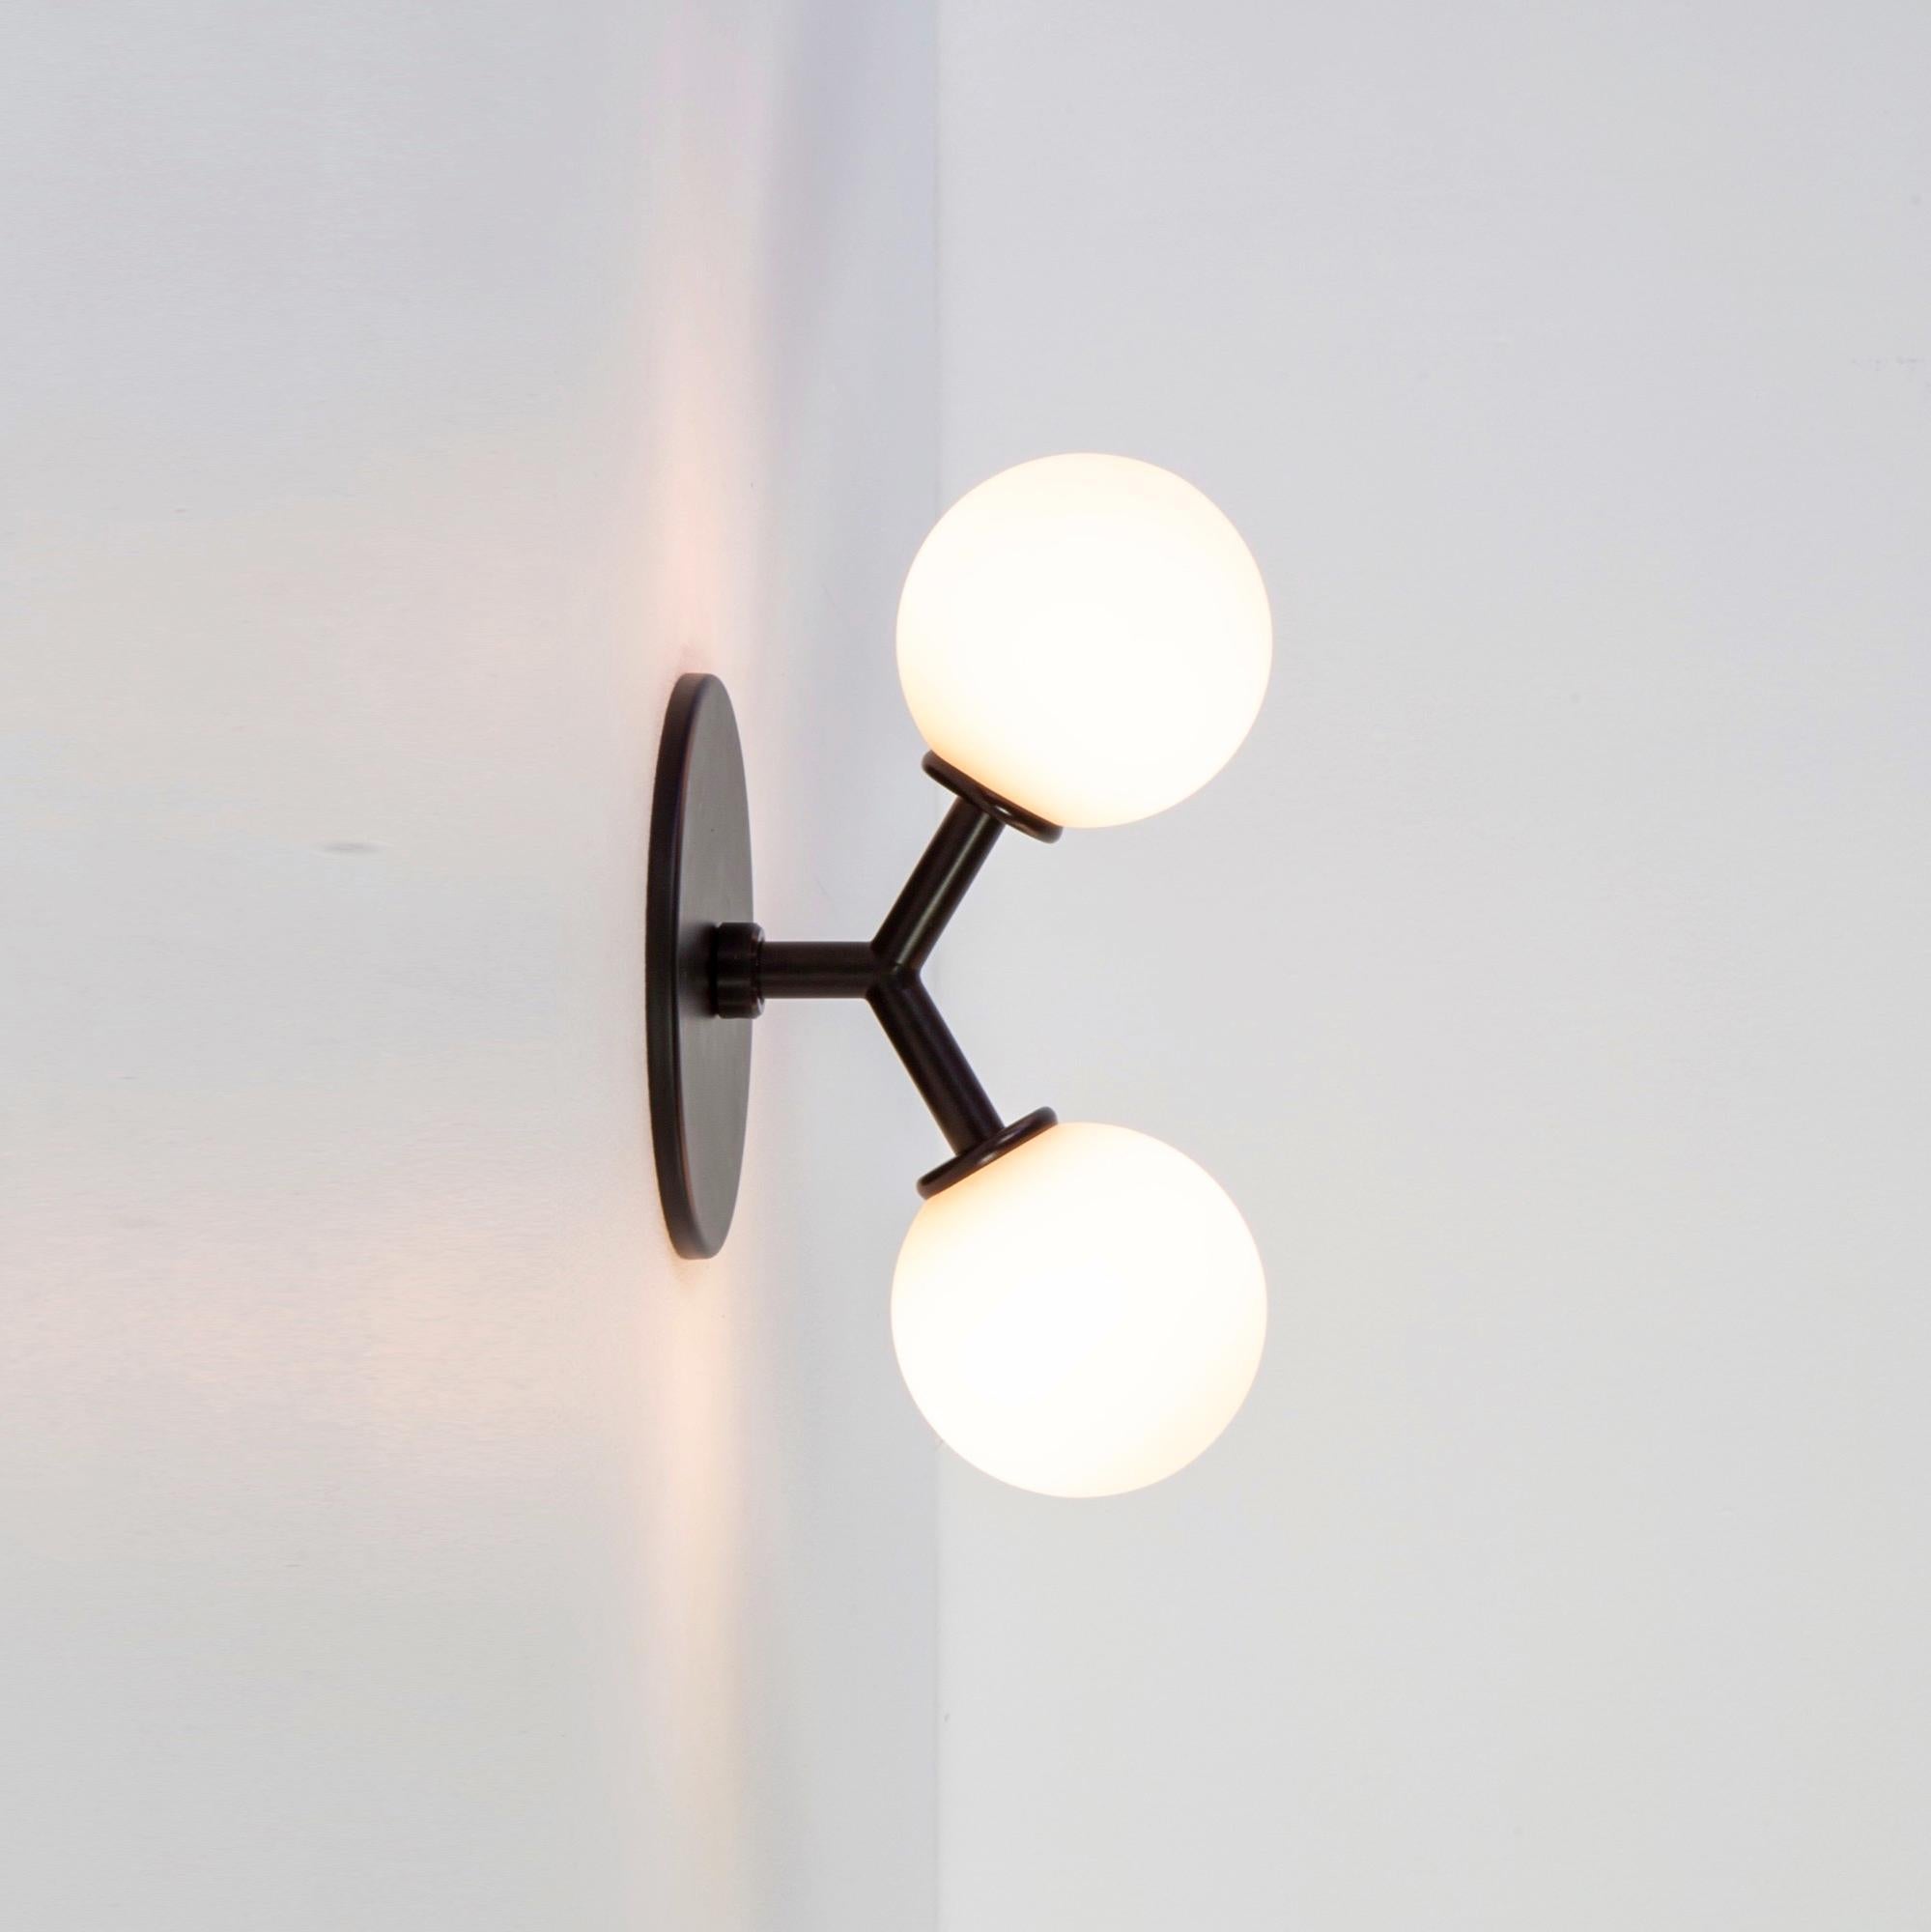 This listing is for 1x Y sconce in black designed and manufactured by Research.Lighting.

Materials: Steel & Glass
Finish: Powder-coated steel 
Electronics: 2x G9 Sockets, 2x 2.5 Watt LED Bulbs (included), 500 Lumens total
UL Listed. Made in the USA.